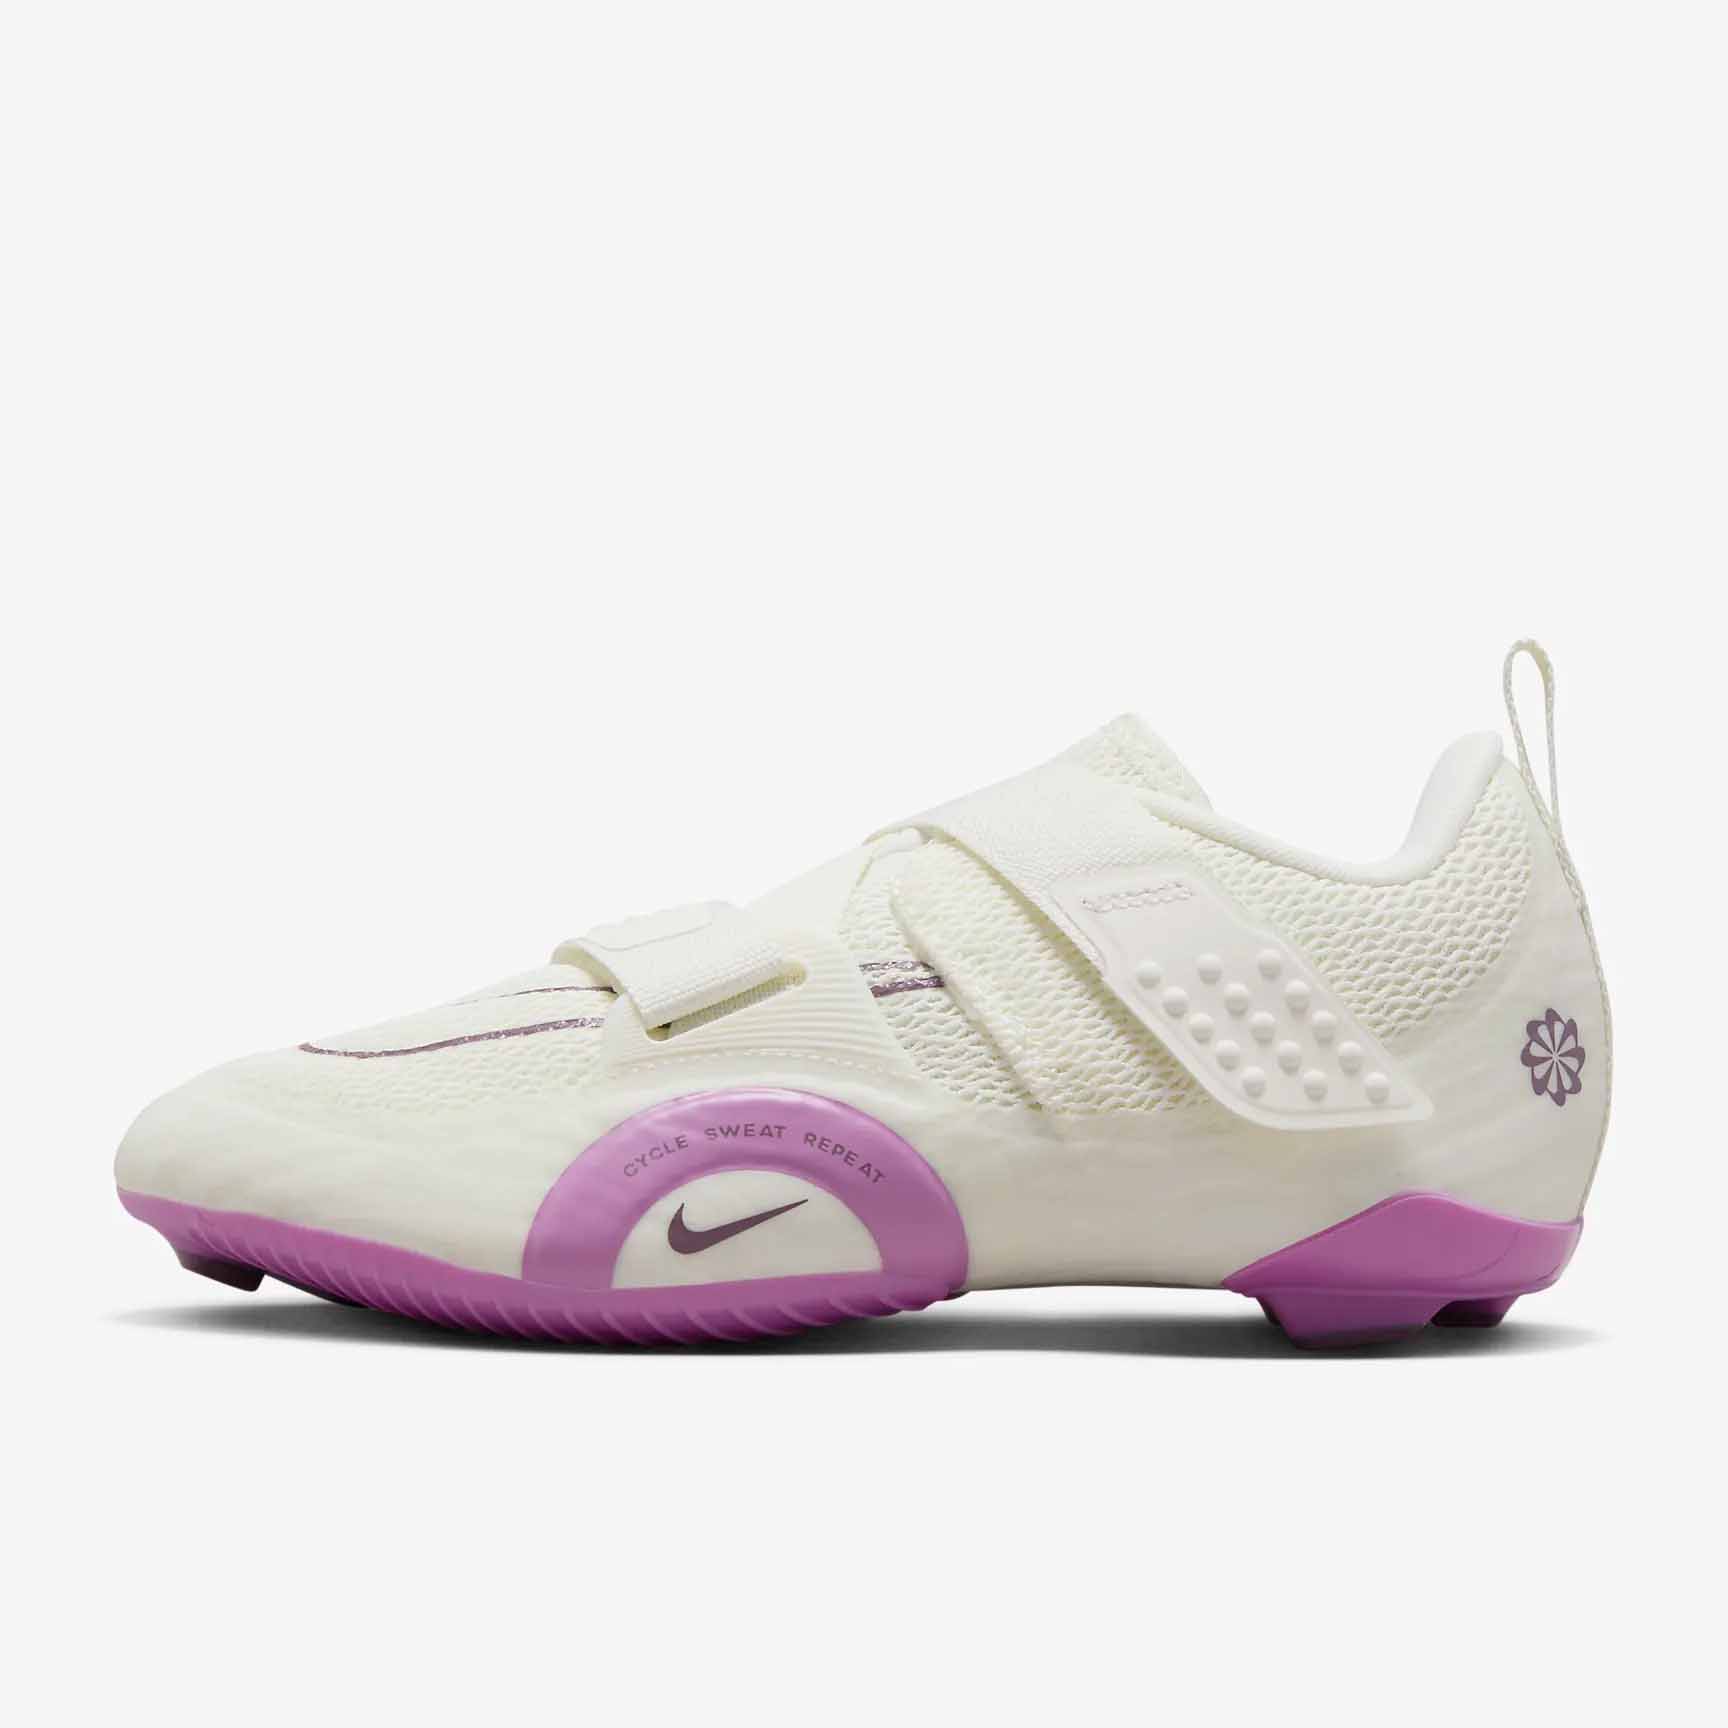 Nike SuperRep Cycle 2 Next Nature trainers in white and purple 